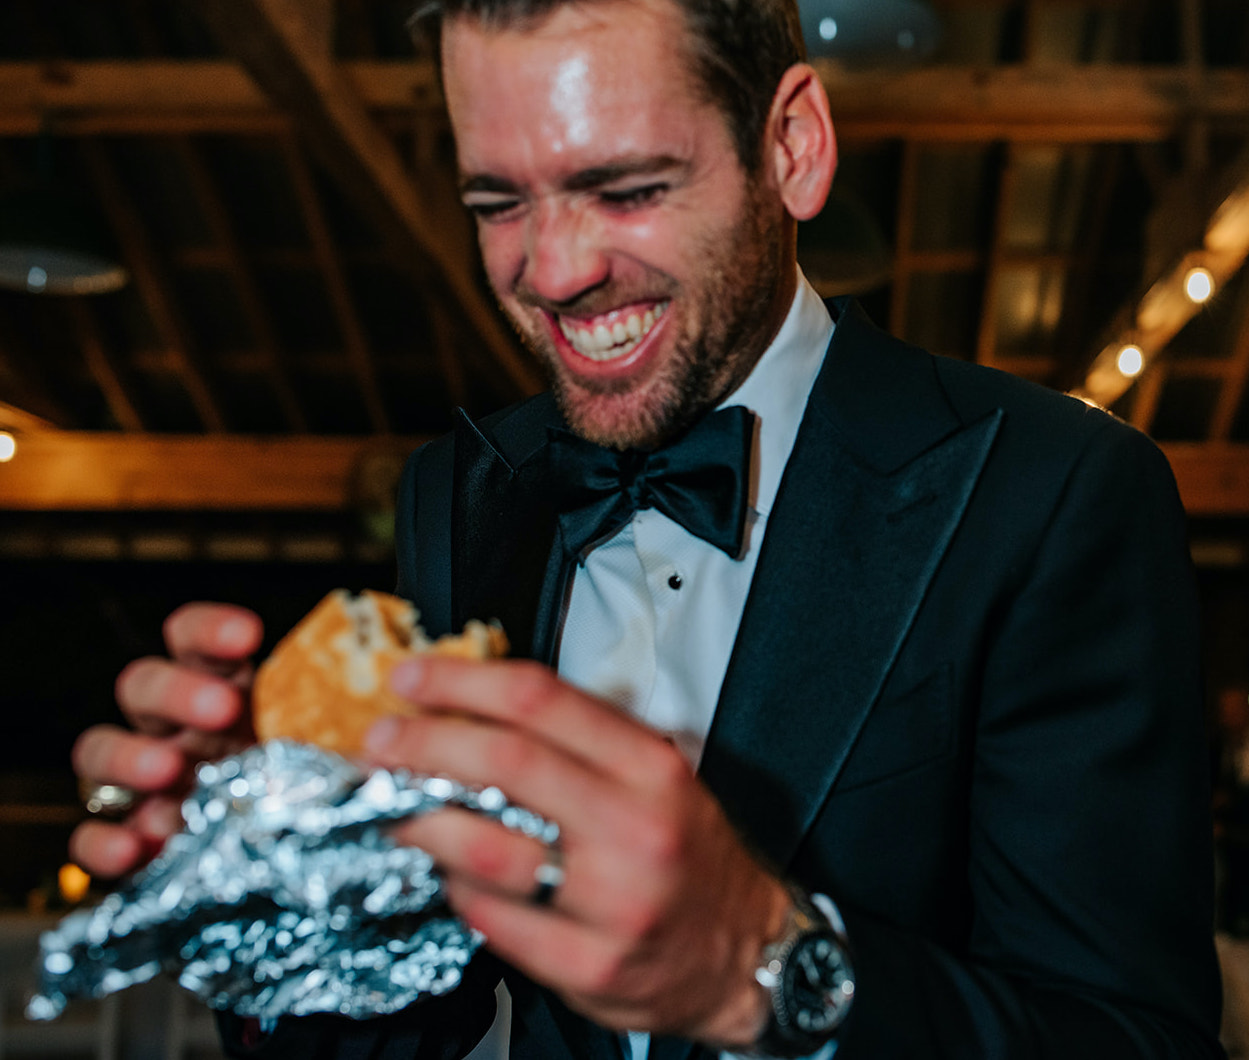 The groom laughs while holding a chicken biscuit from Whataburger at their winter wedding reception at 7F Lodge in College Station, TX.